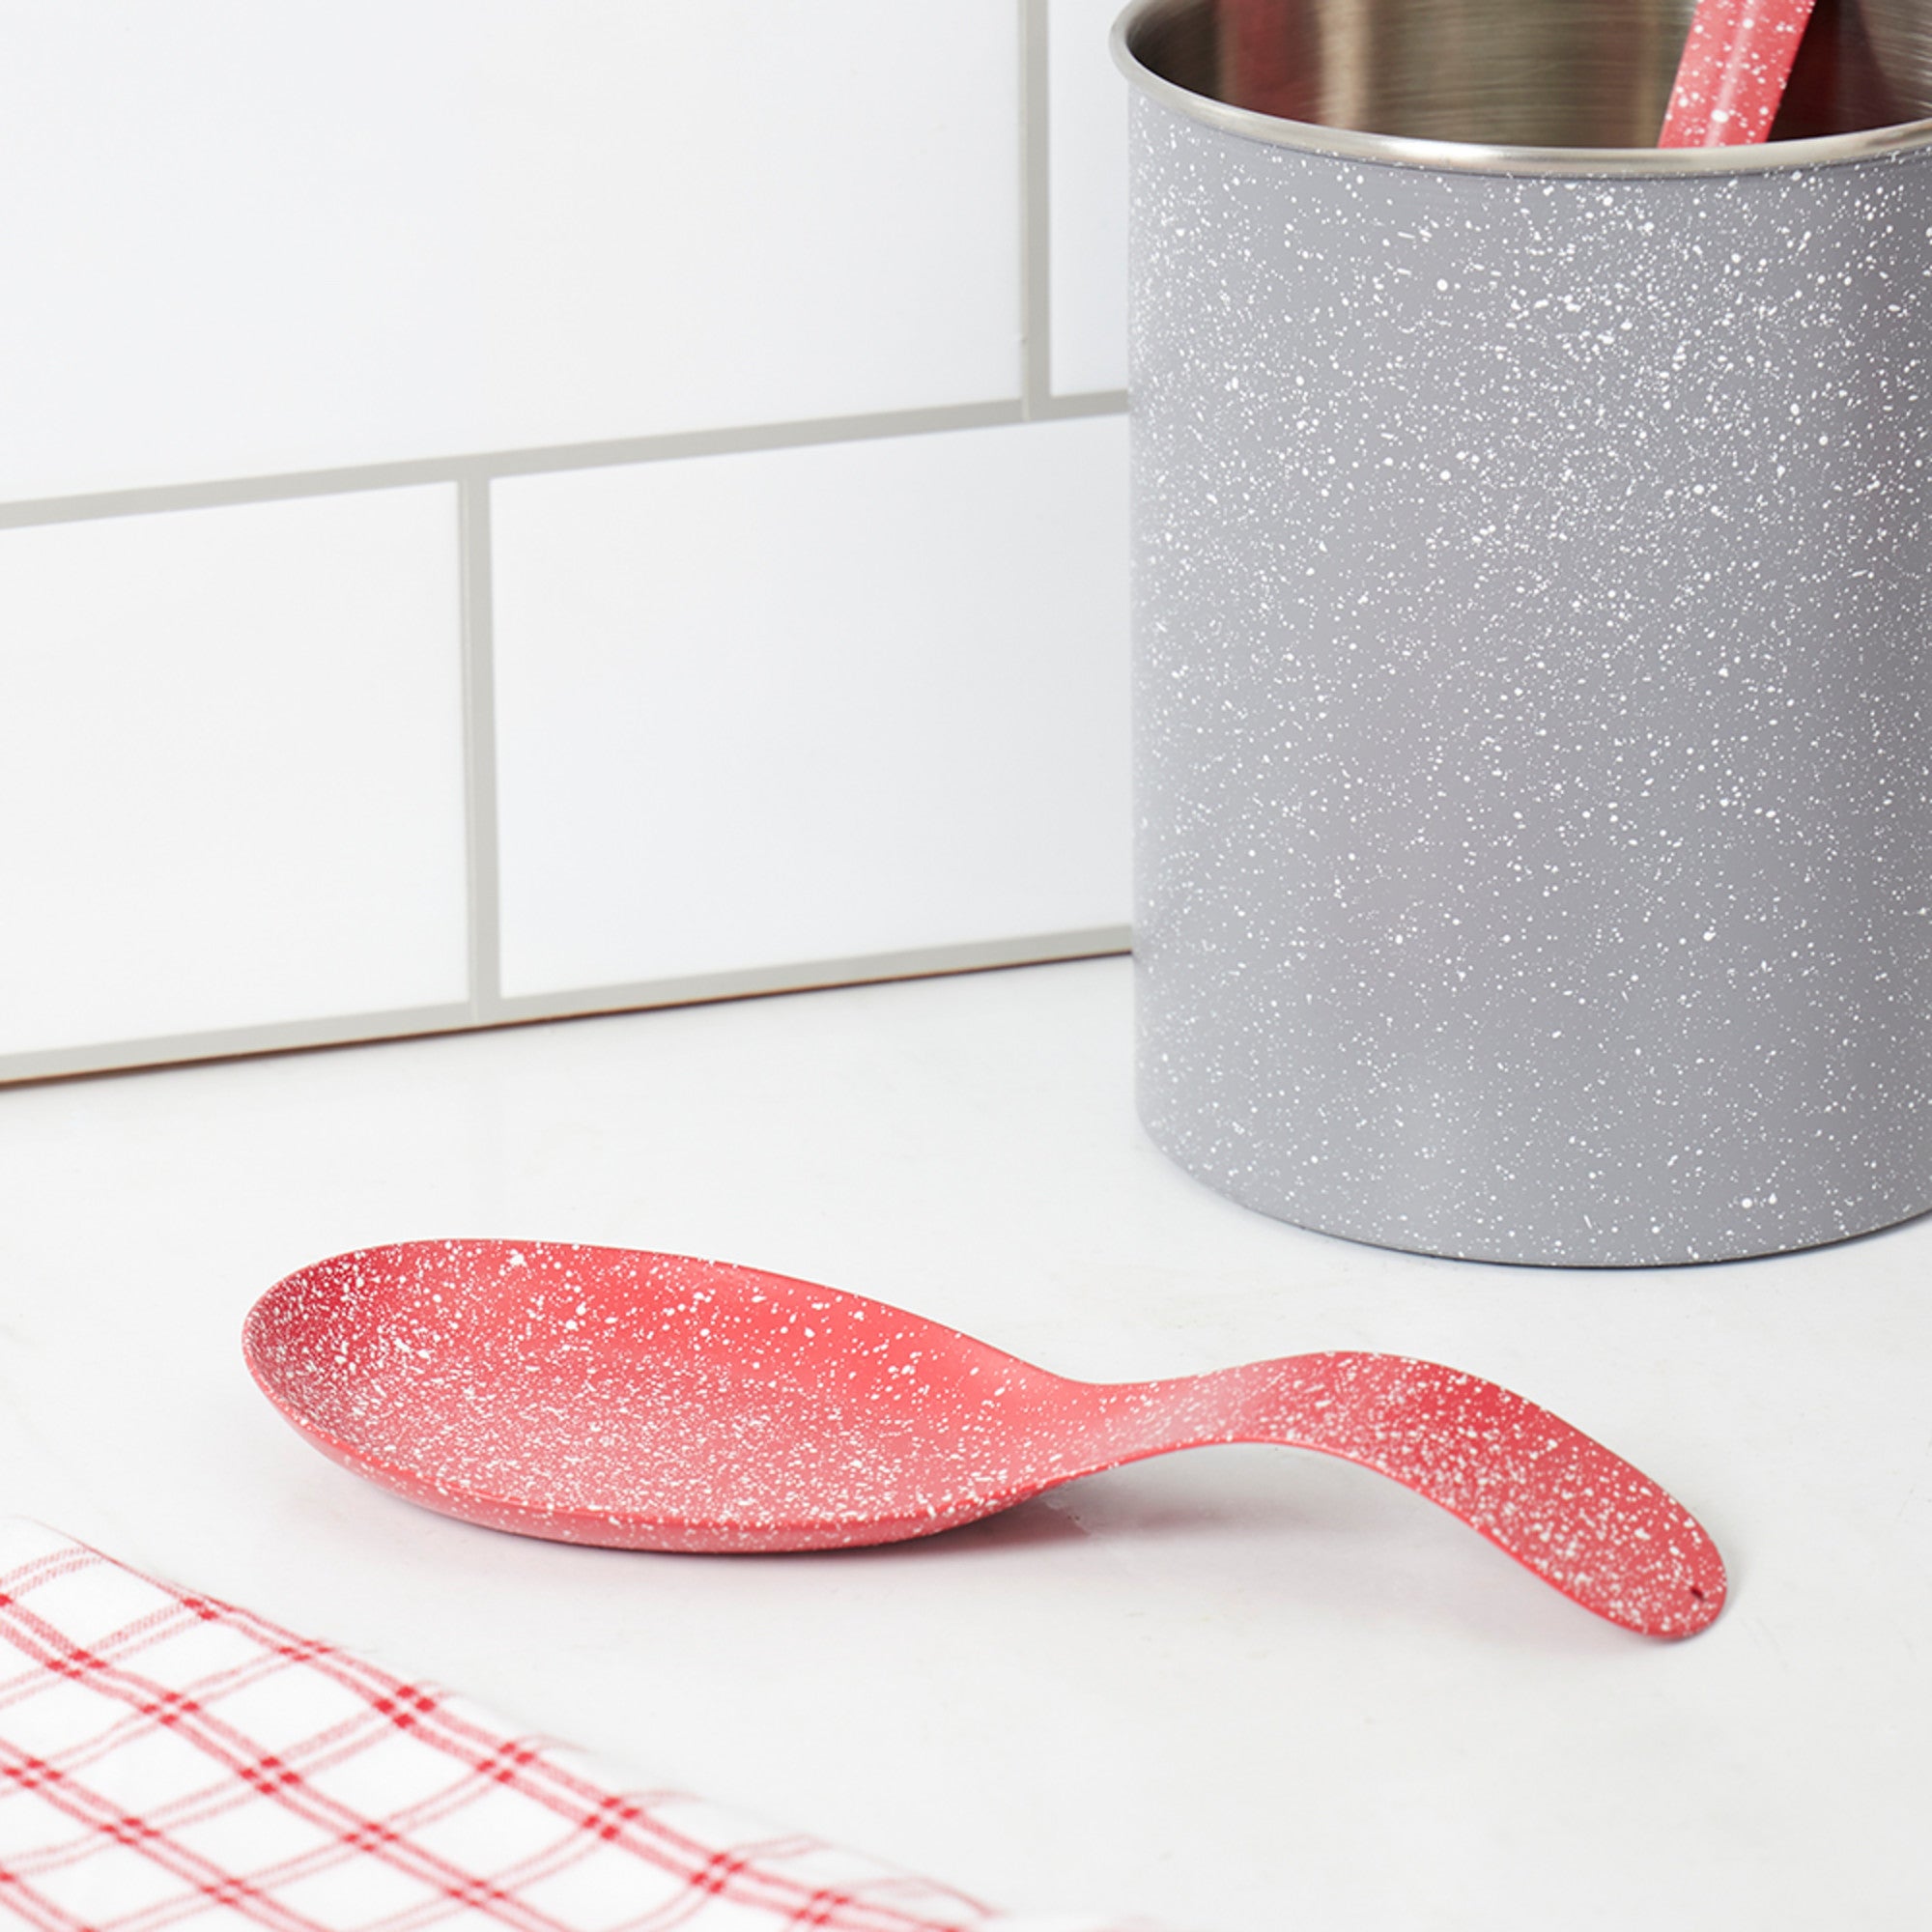 Home Basics Speckled Stainless Steel Spoon Rest - Assorted Colors